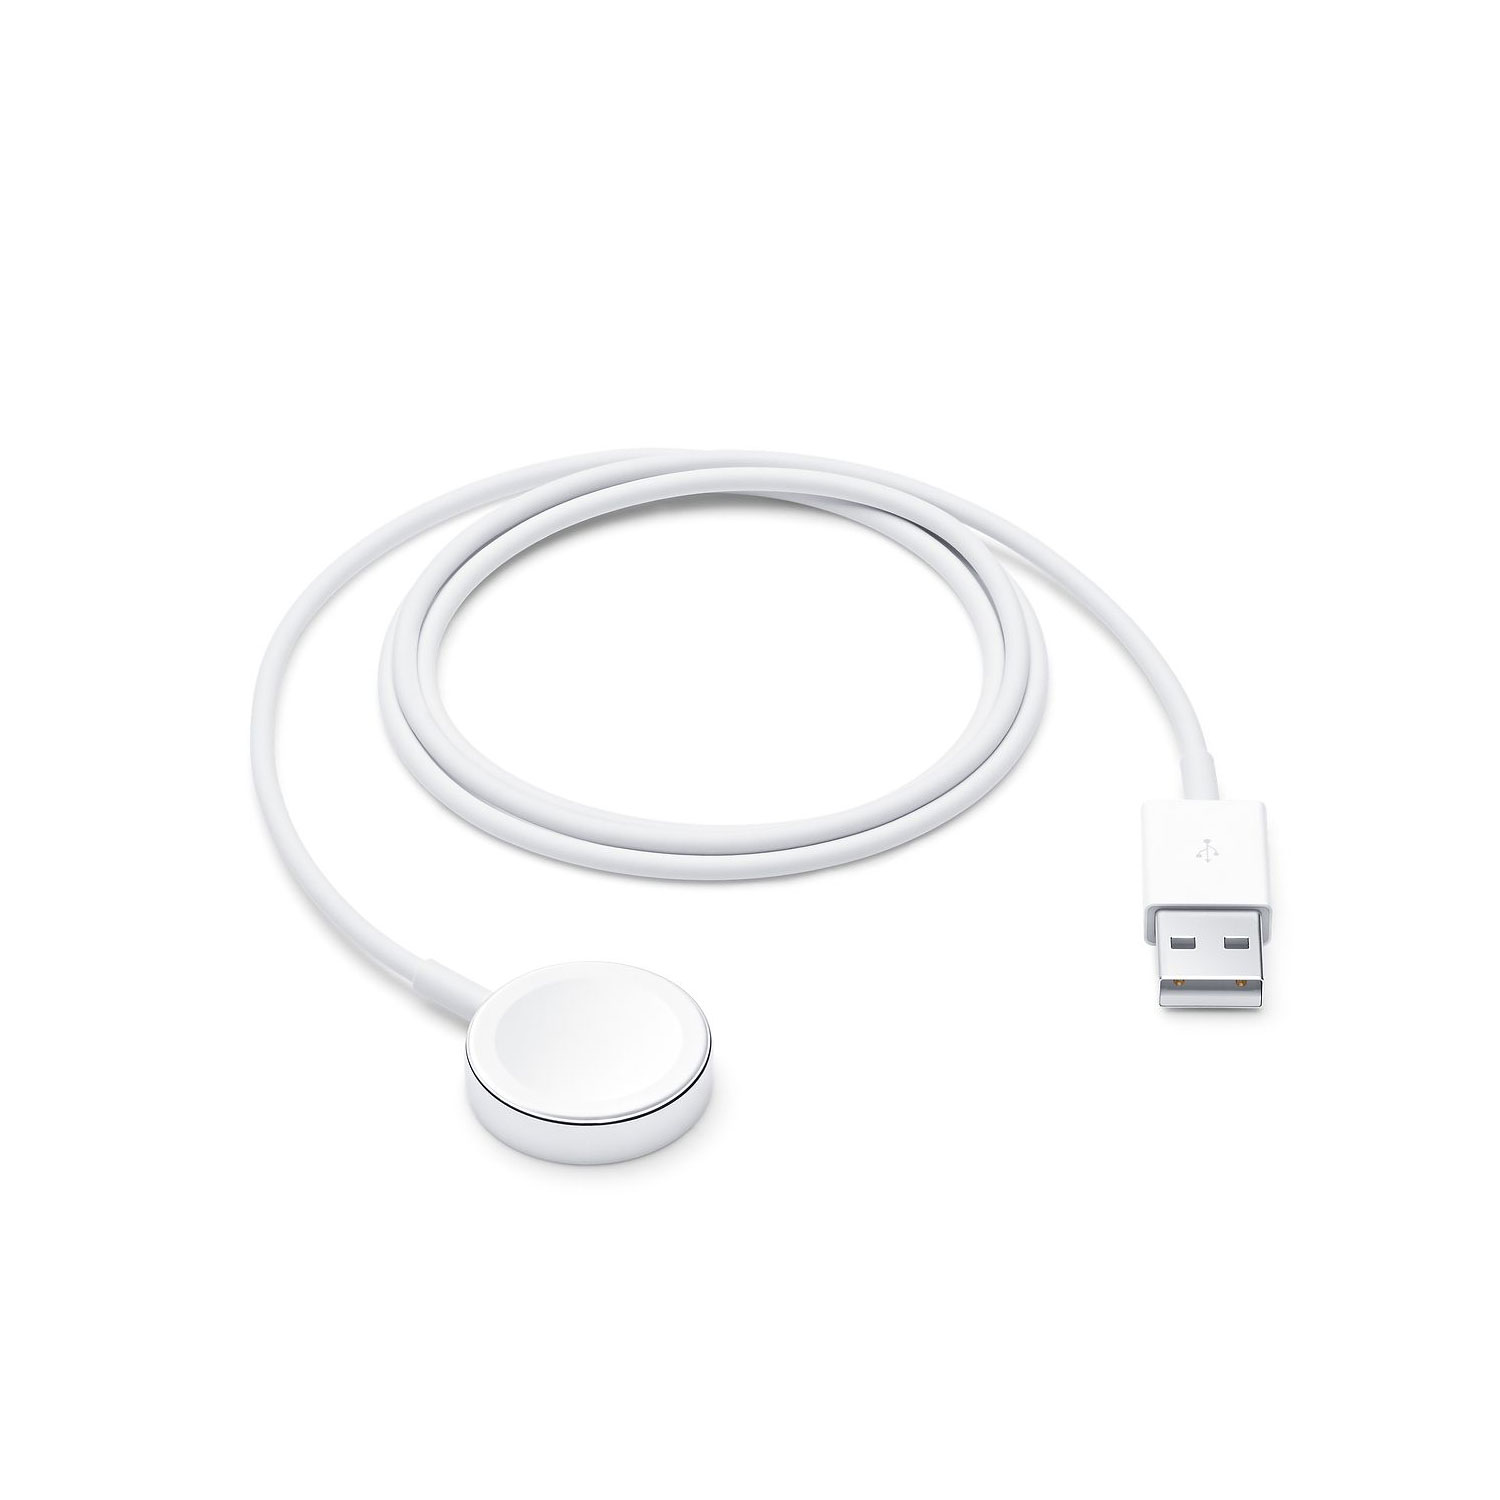 original-apple-watch-magnetic-charging-cable-for-wholesale_788126.jpg